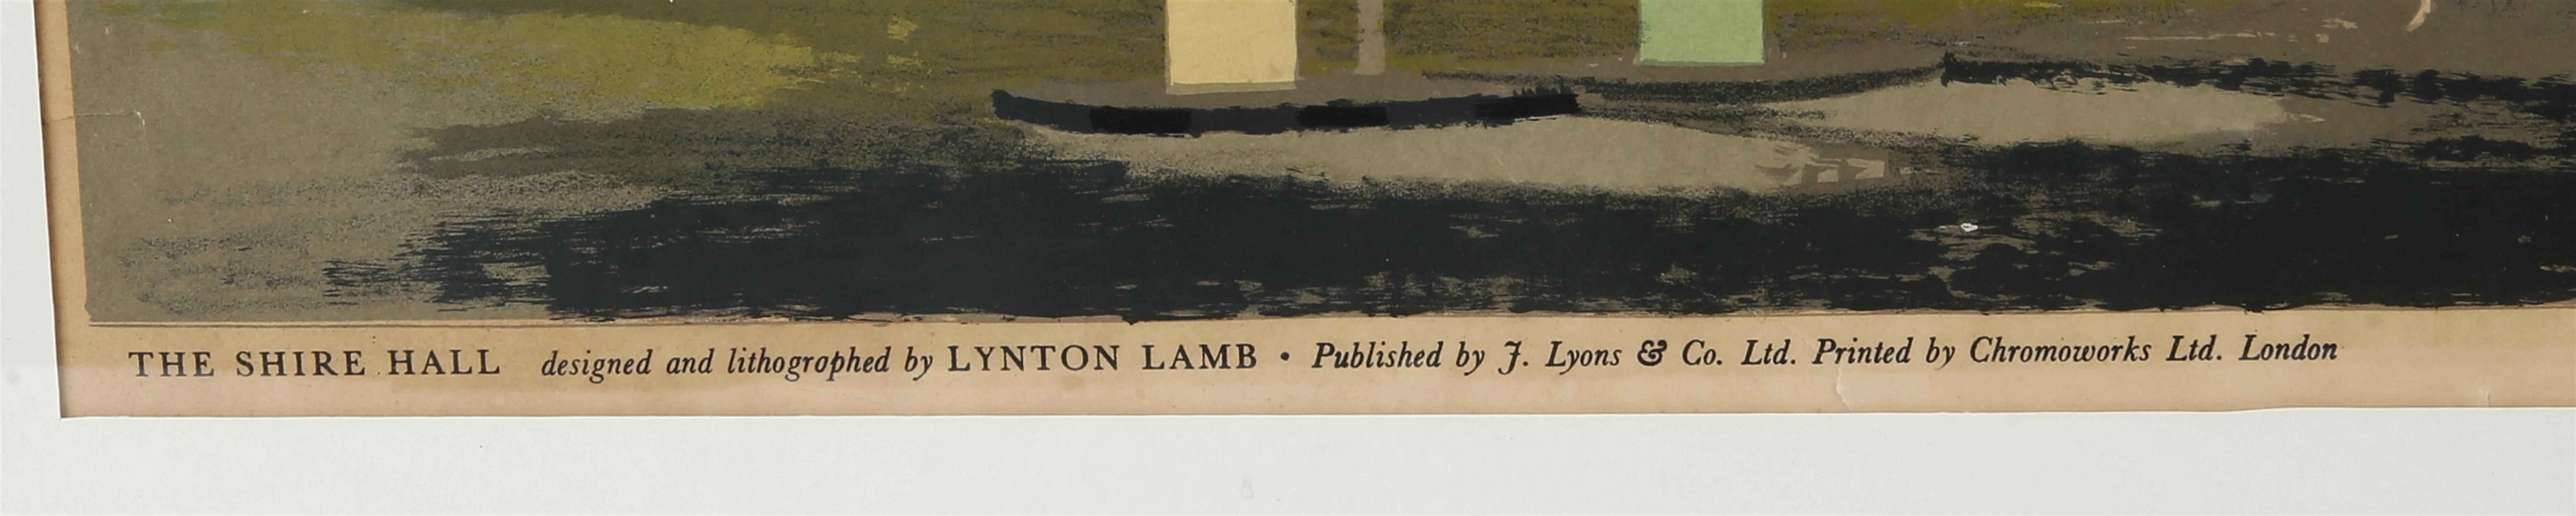 Lynton Lamb (British 1907-1977), The Shire Hall, colour lithograph, published by J. Lyons & Co Ltd, - Image 3 of 4